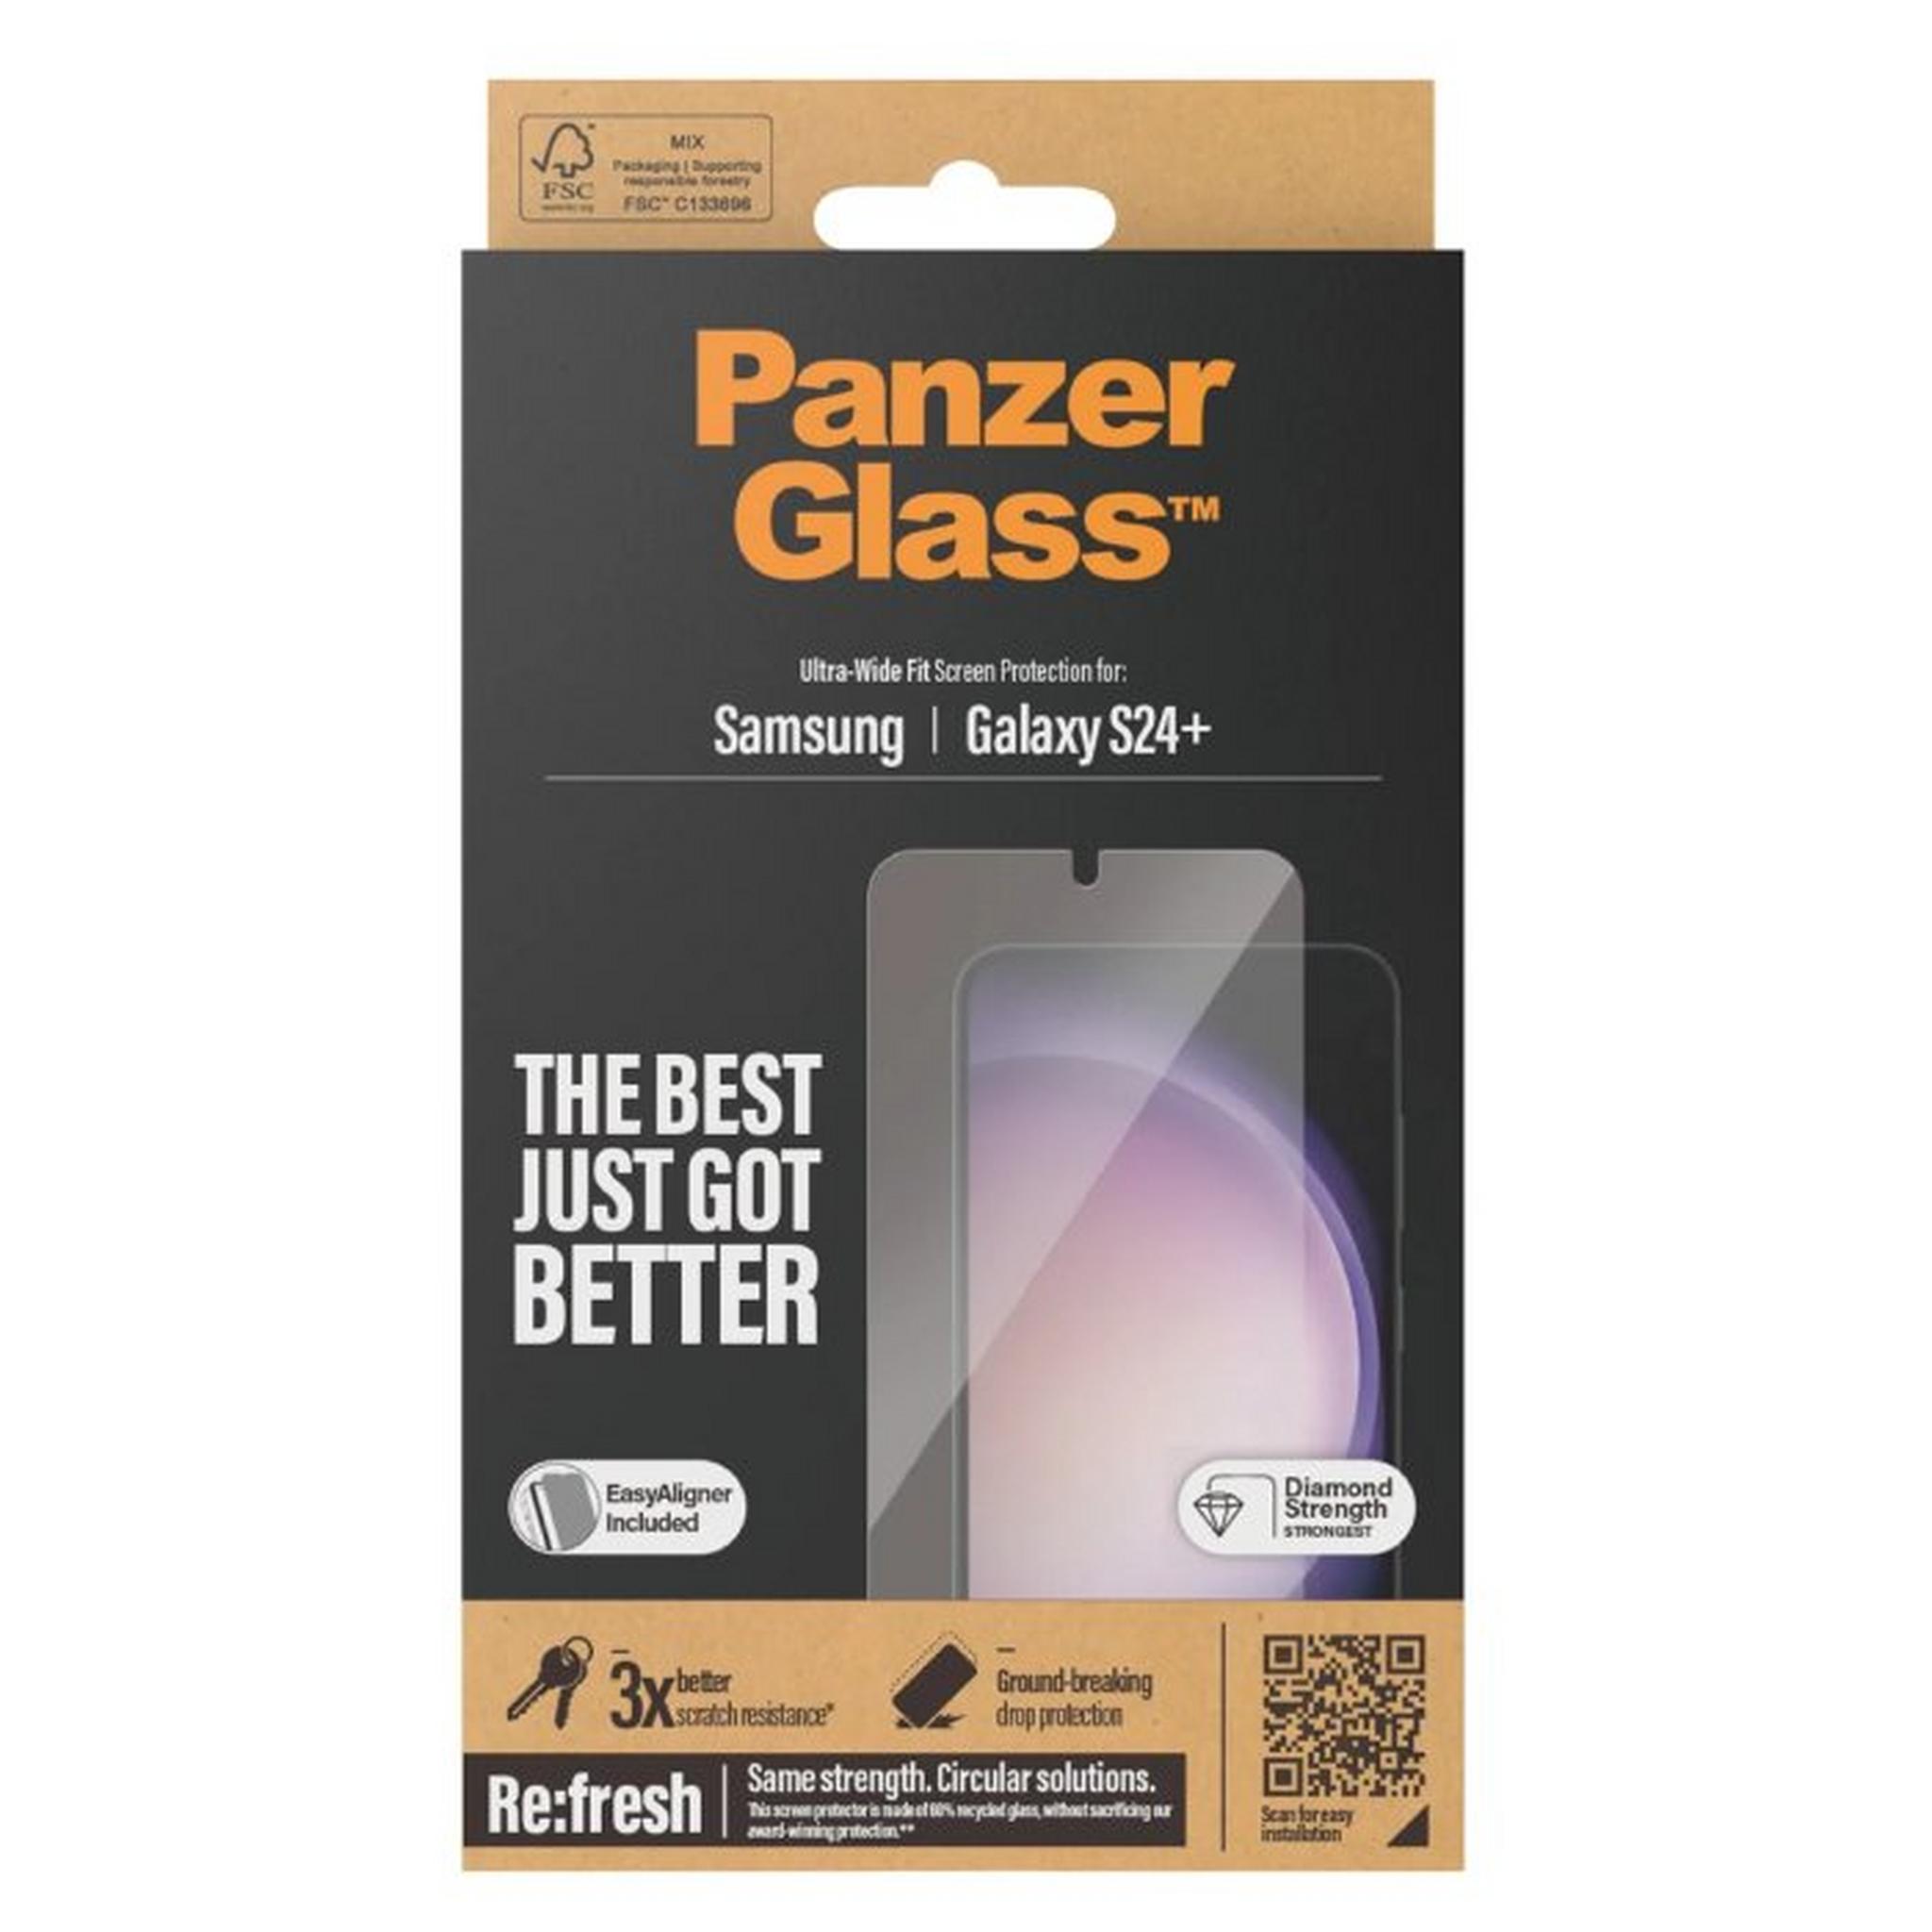 PANZER Glass Screen Protector for Samsung Galaxy S24 Plus, Ultra-Wide Fit, 7351